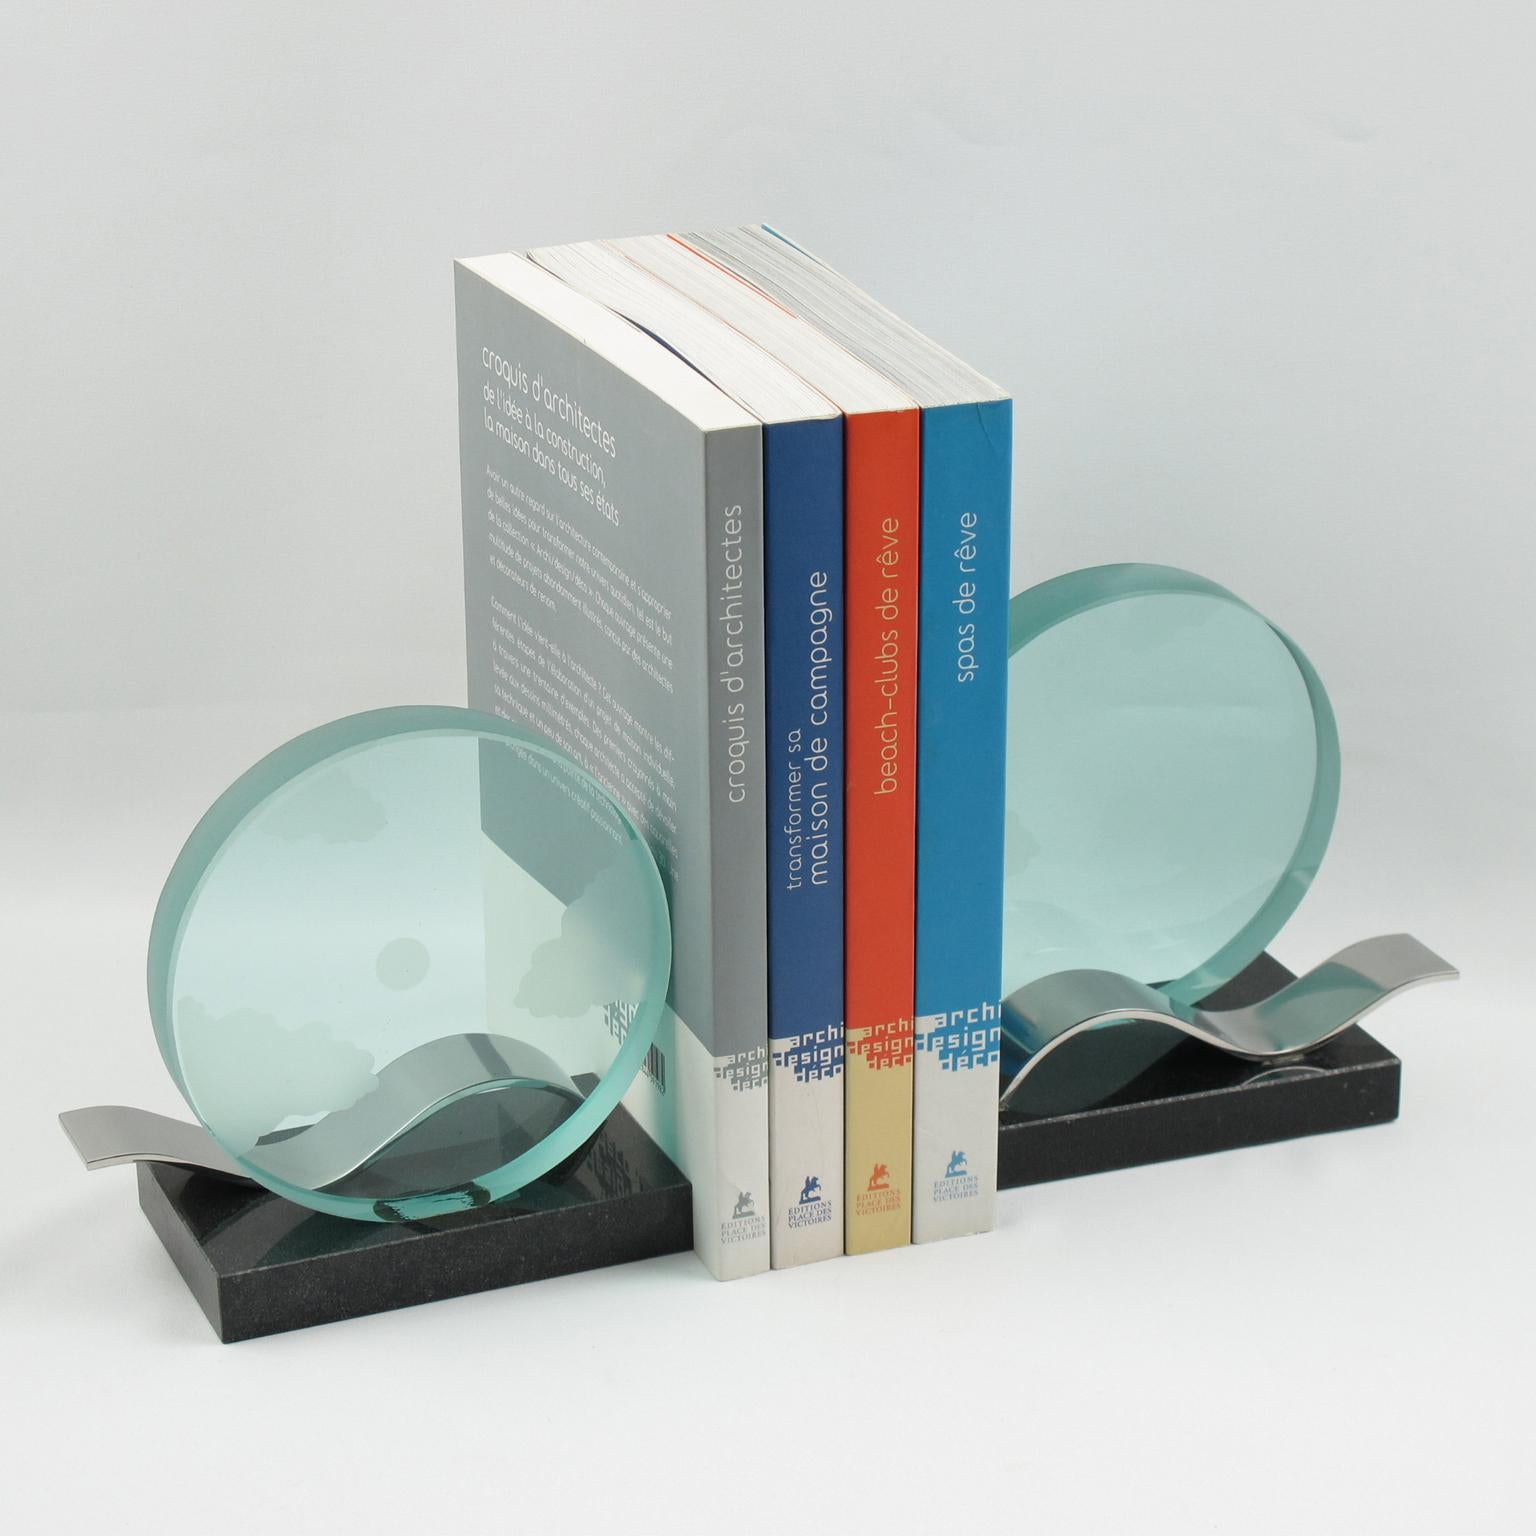 This architecturally designed pair of bookends from the 1980s is a modernist marvel. The large round disk glass slab is etched with clouds and dots, and the base is constructed of black granite with a large chromed metal wave. These decorative